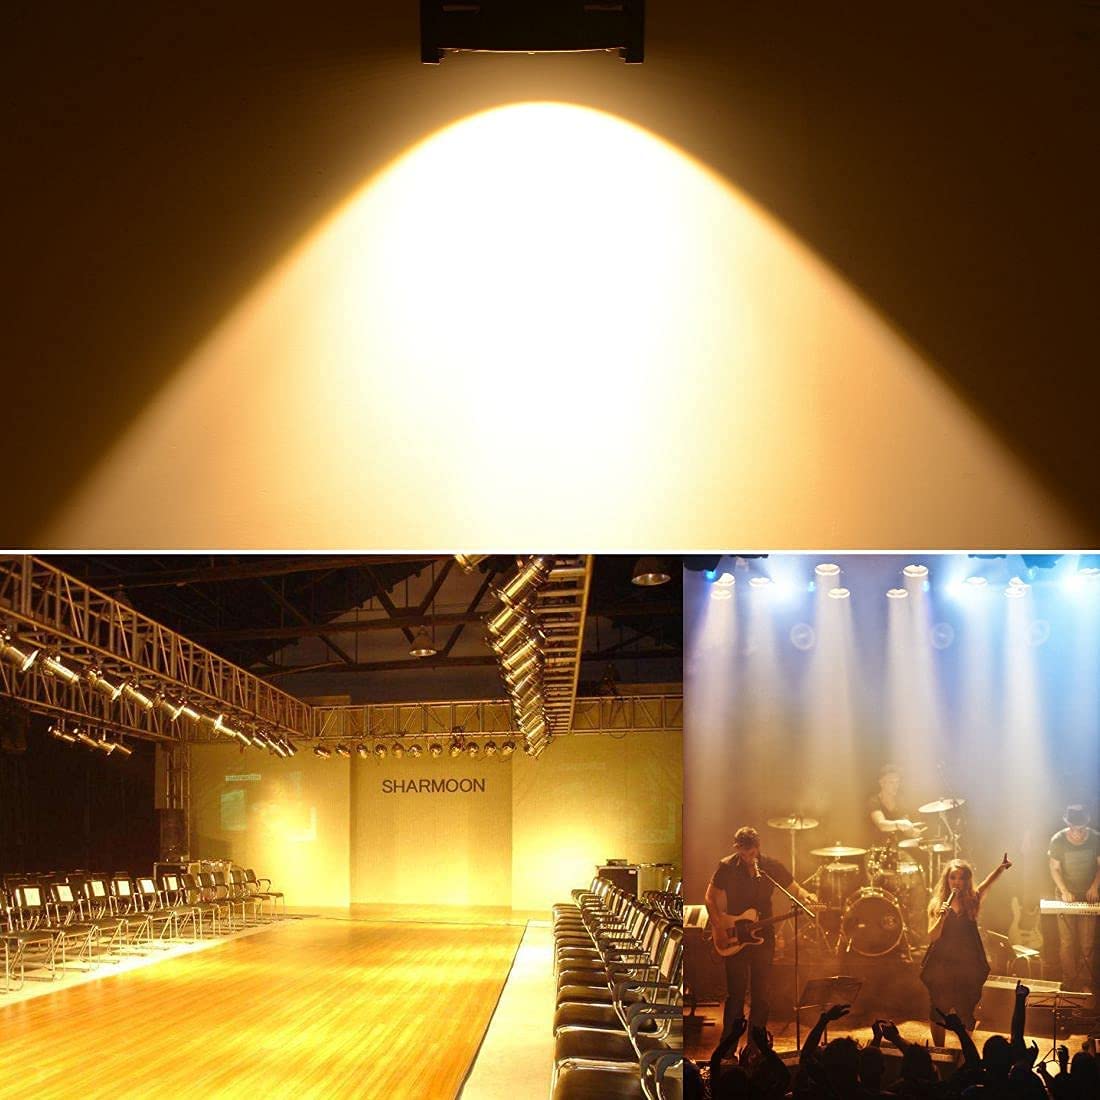 Design and realization of stage lighting virtual effect